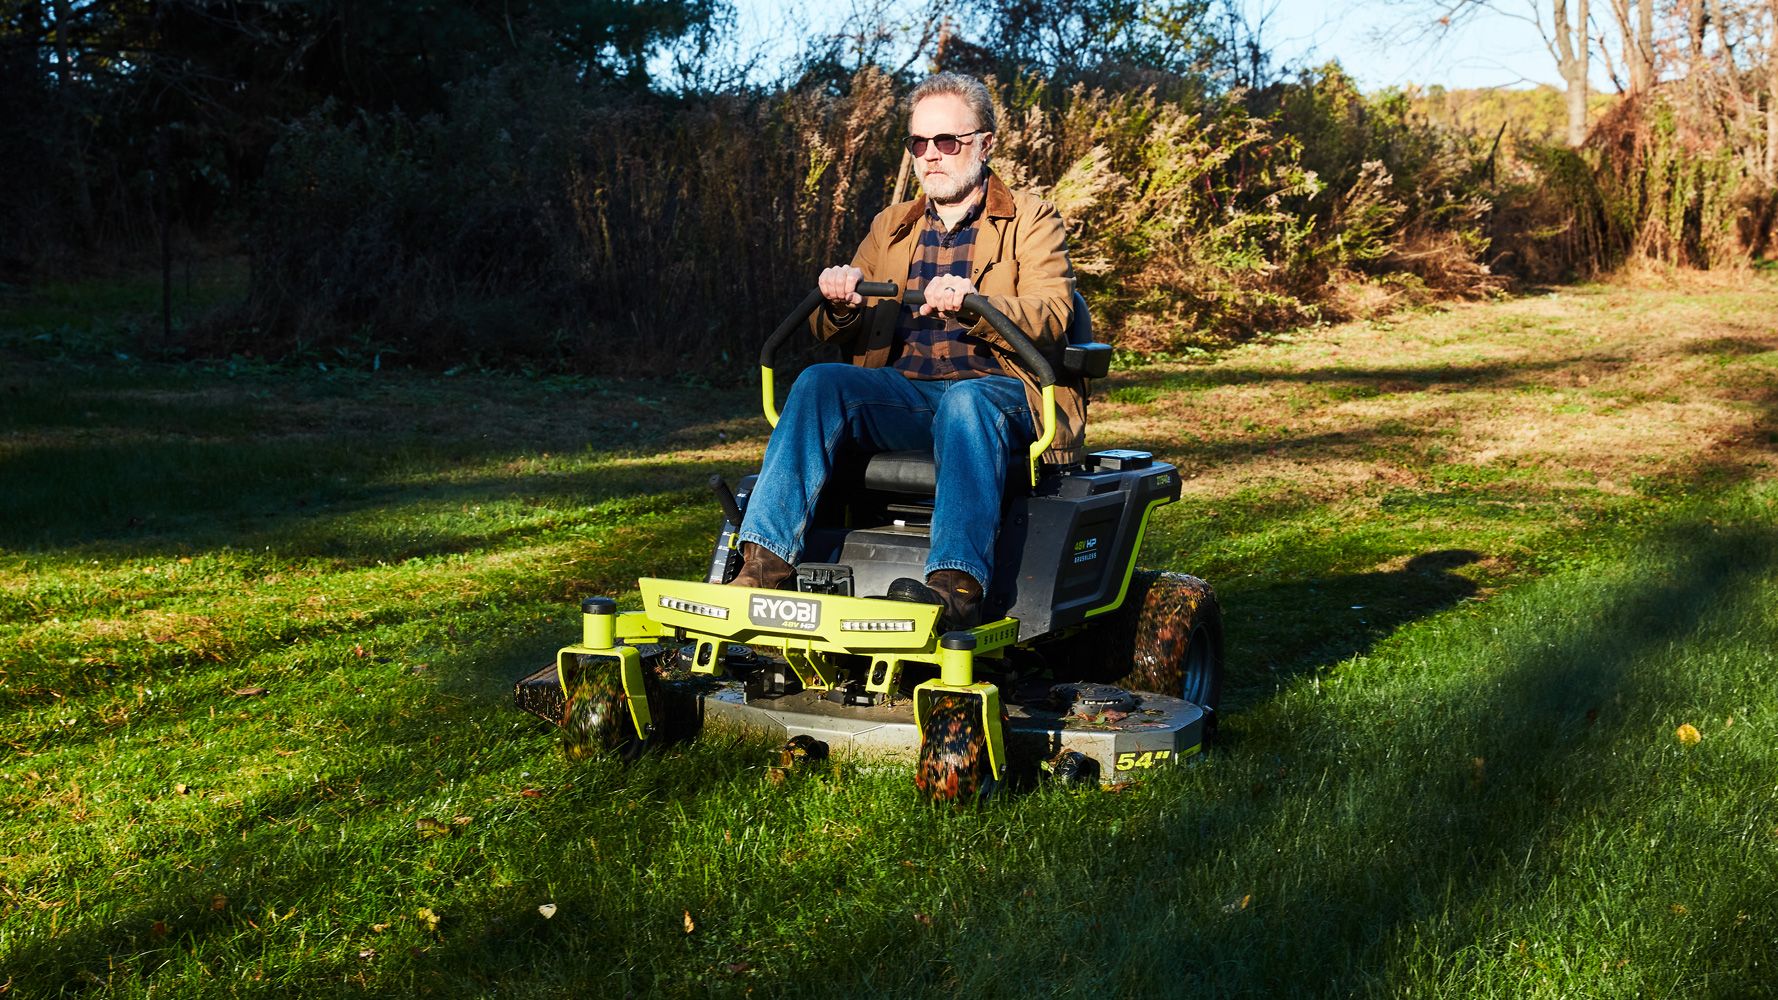 best riding lawn mowers